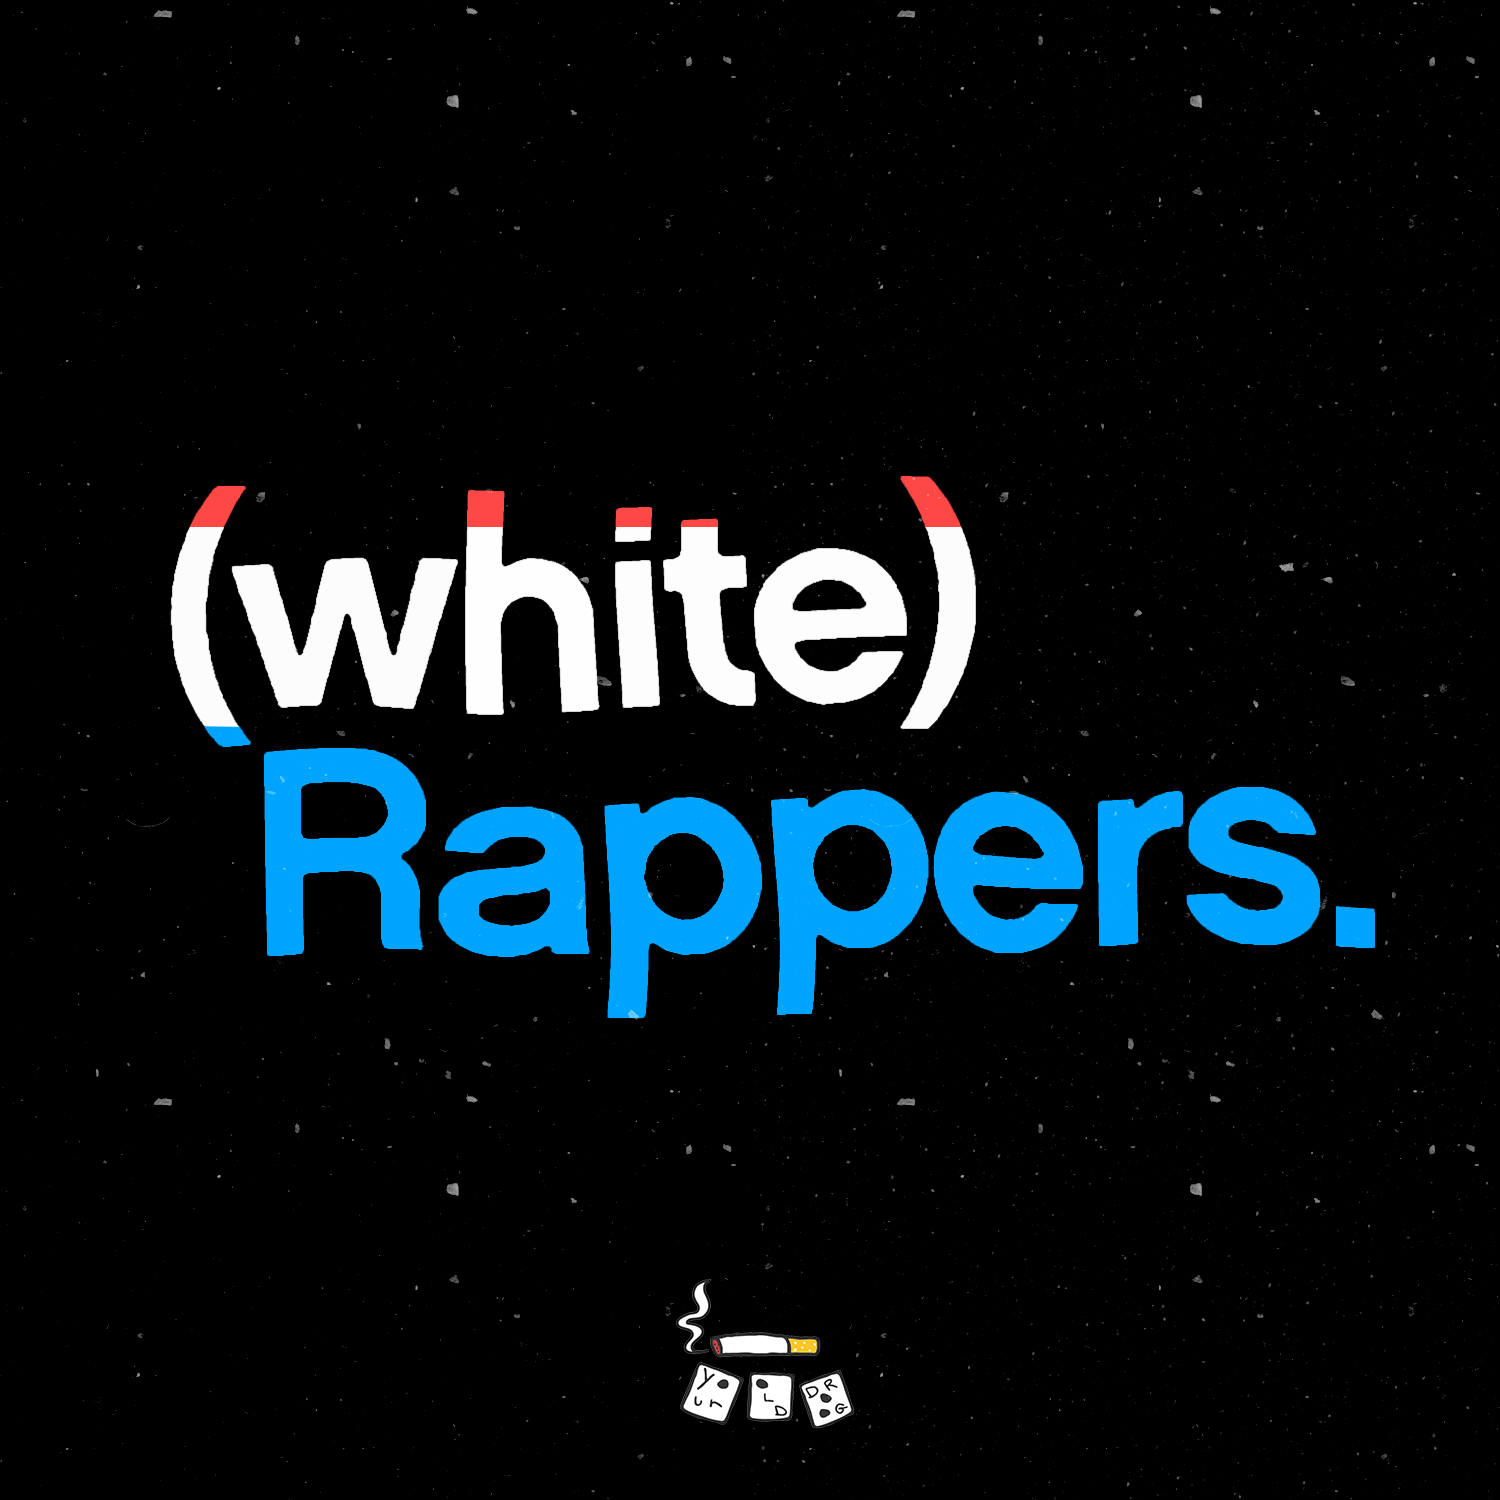 Your Old Droog — “White Rappers.” produced by El RTNC